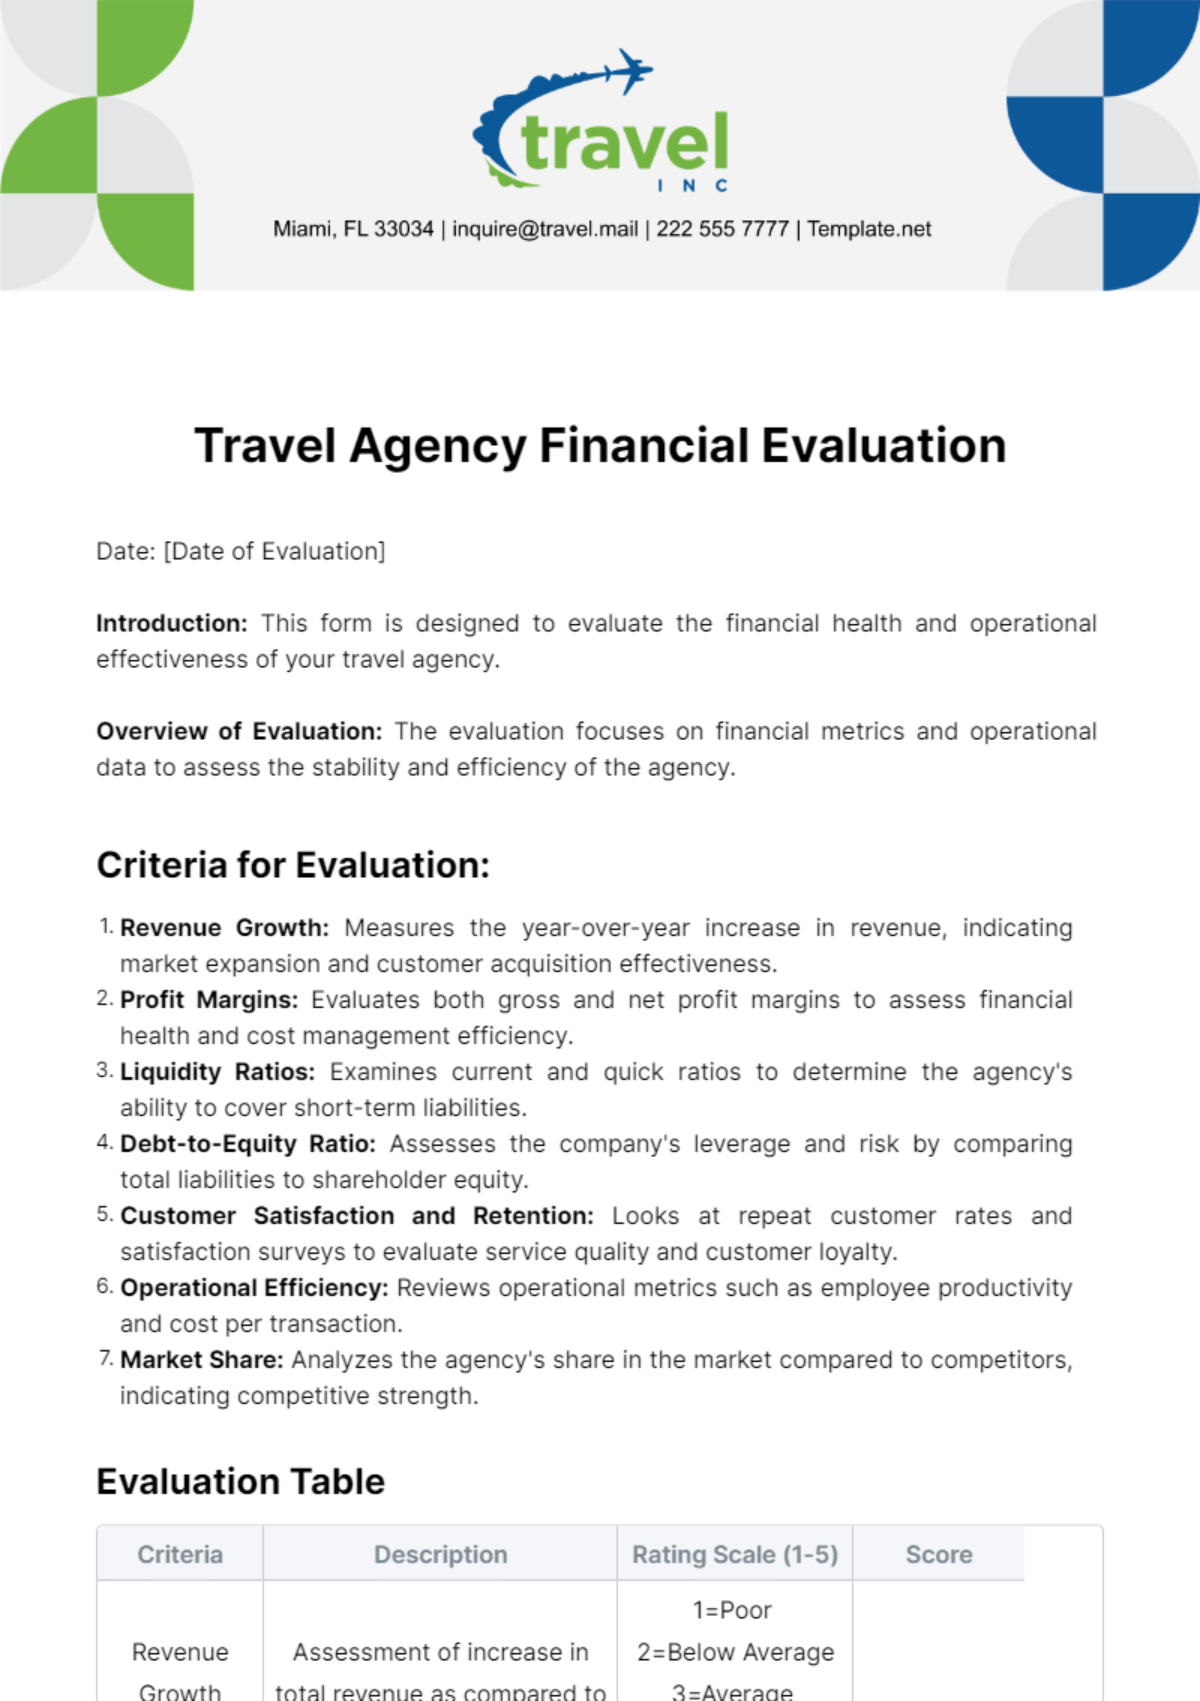 Travel Agency Financial Evaluation Template